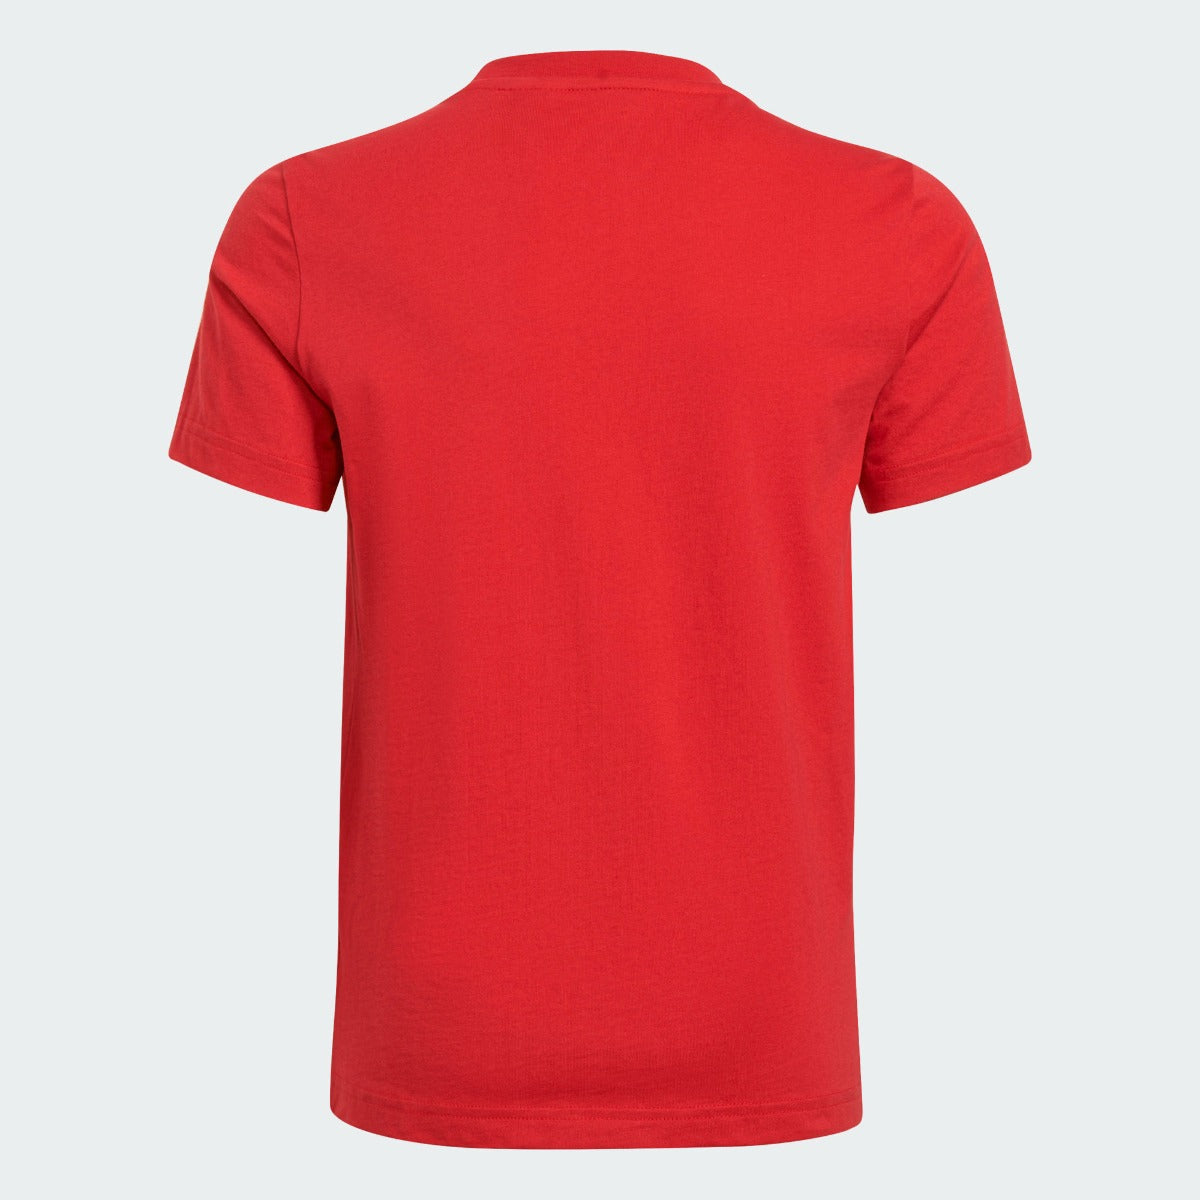 Adidas 2021-22 Manchester United Youth Tee - Red (Back)